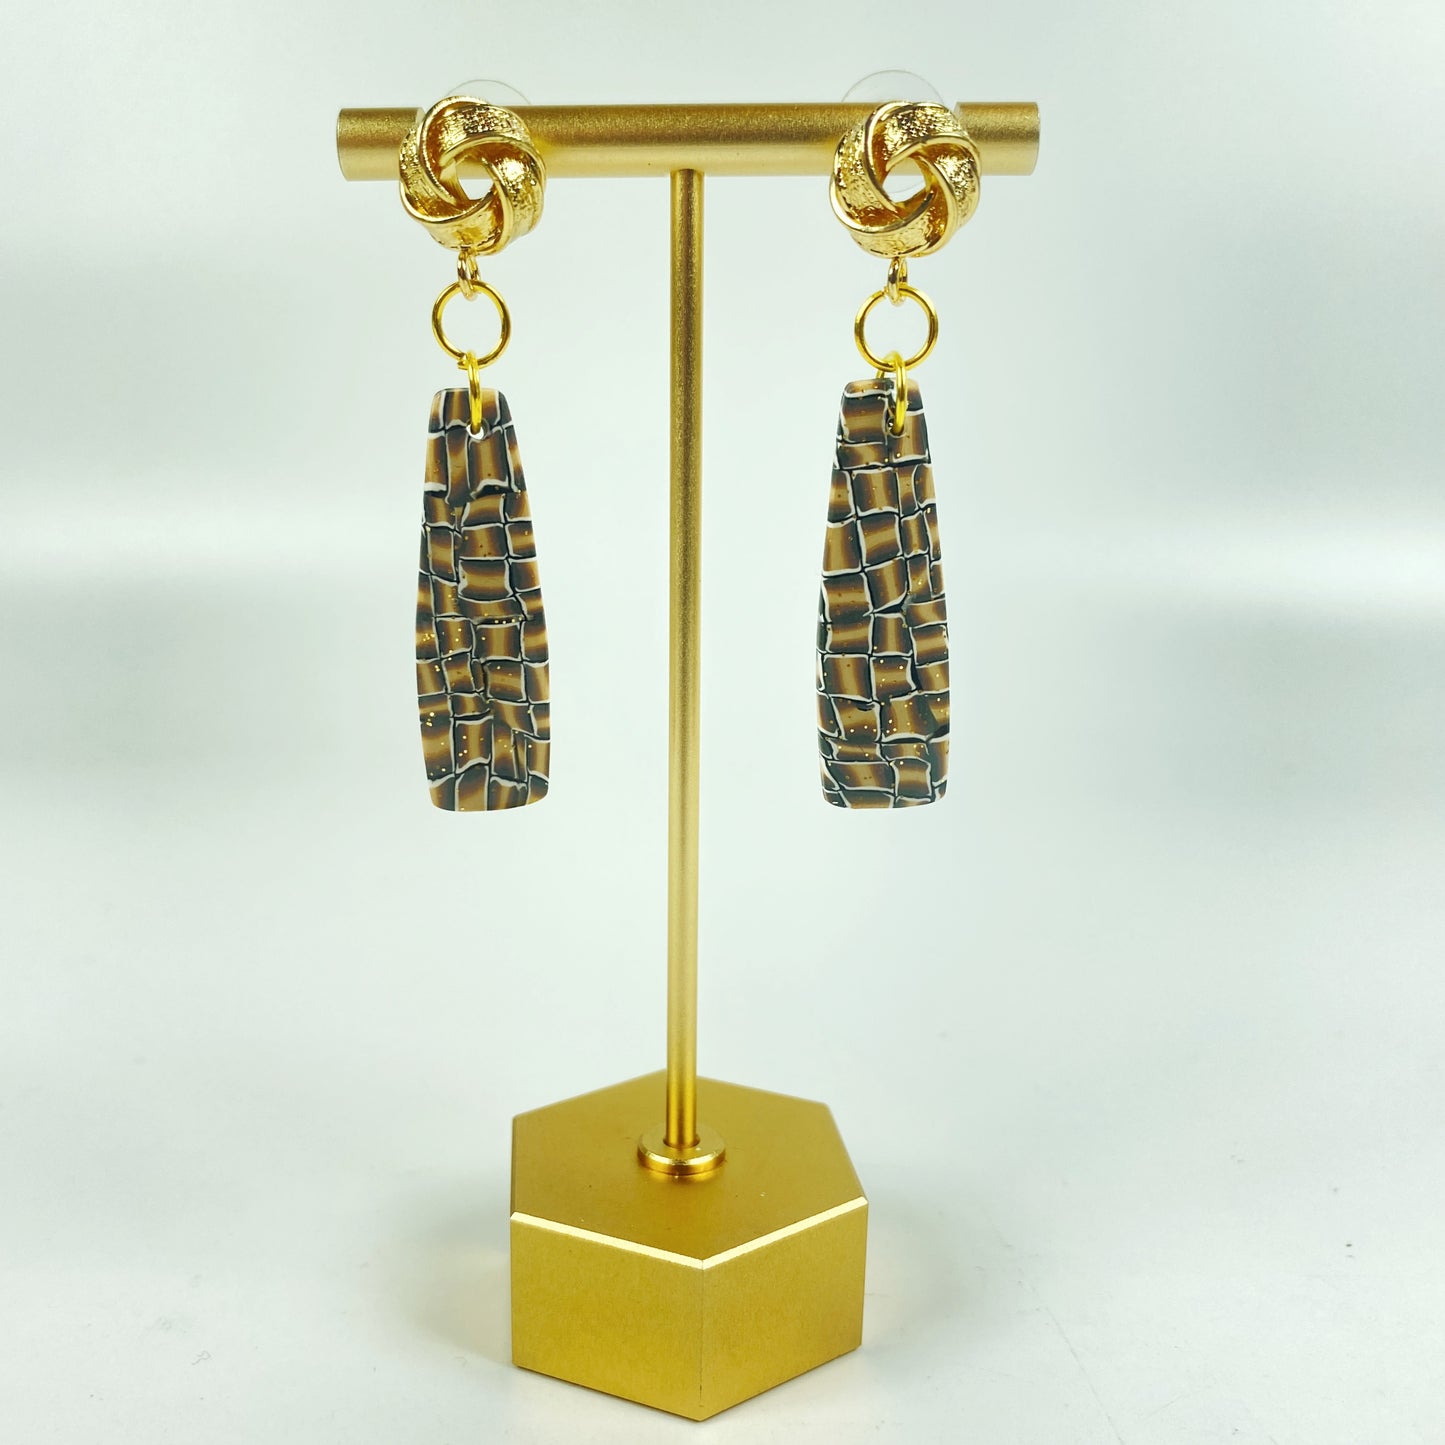 Golden Lattice Polymer Clay Handmade Dangle Earrings on a brass display stand